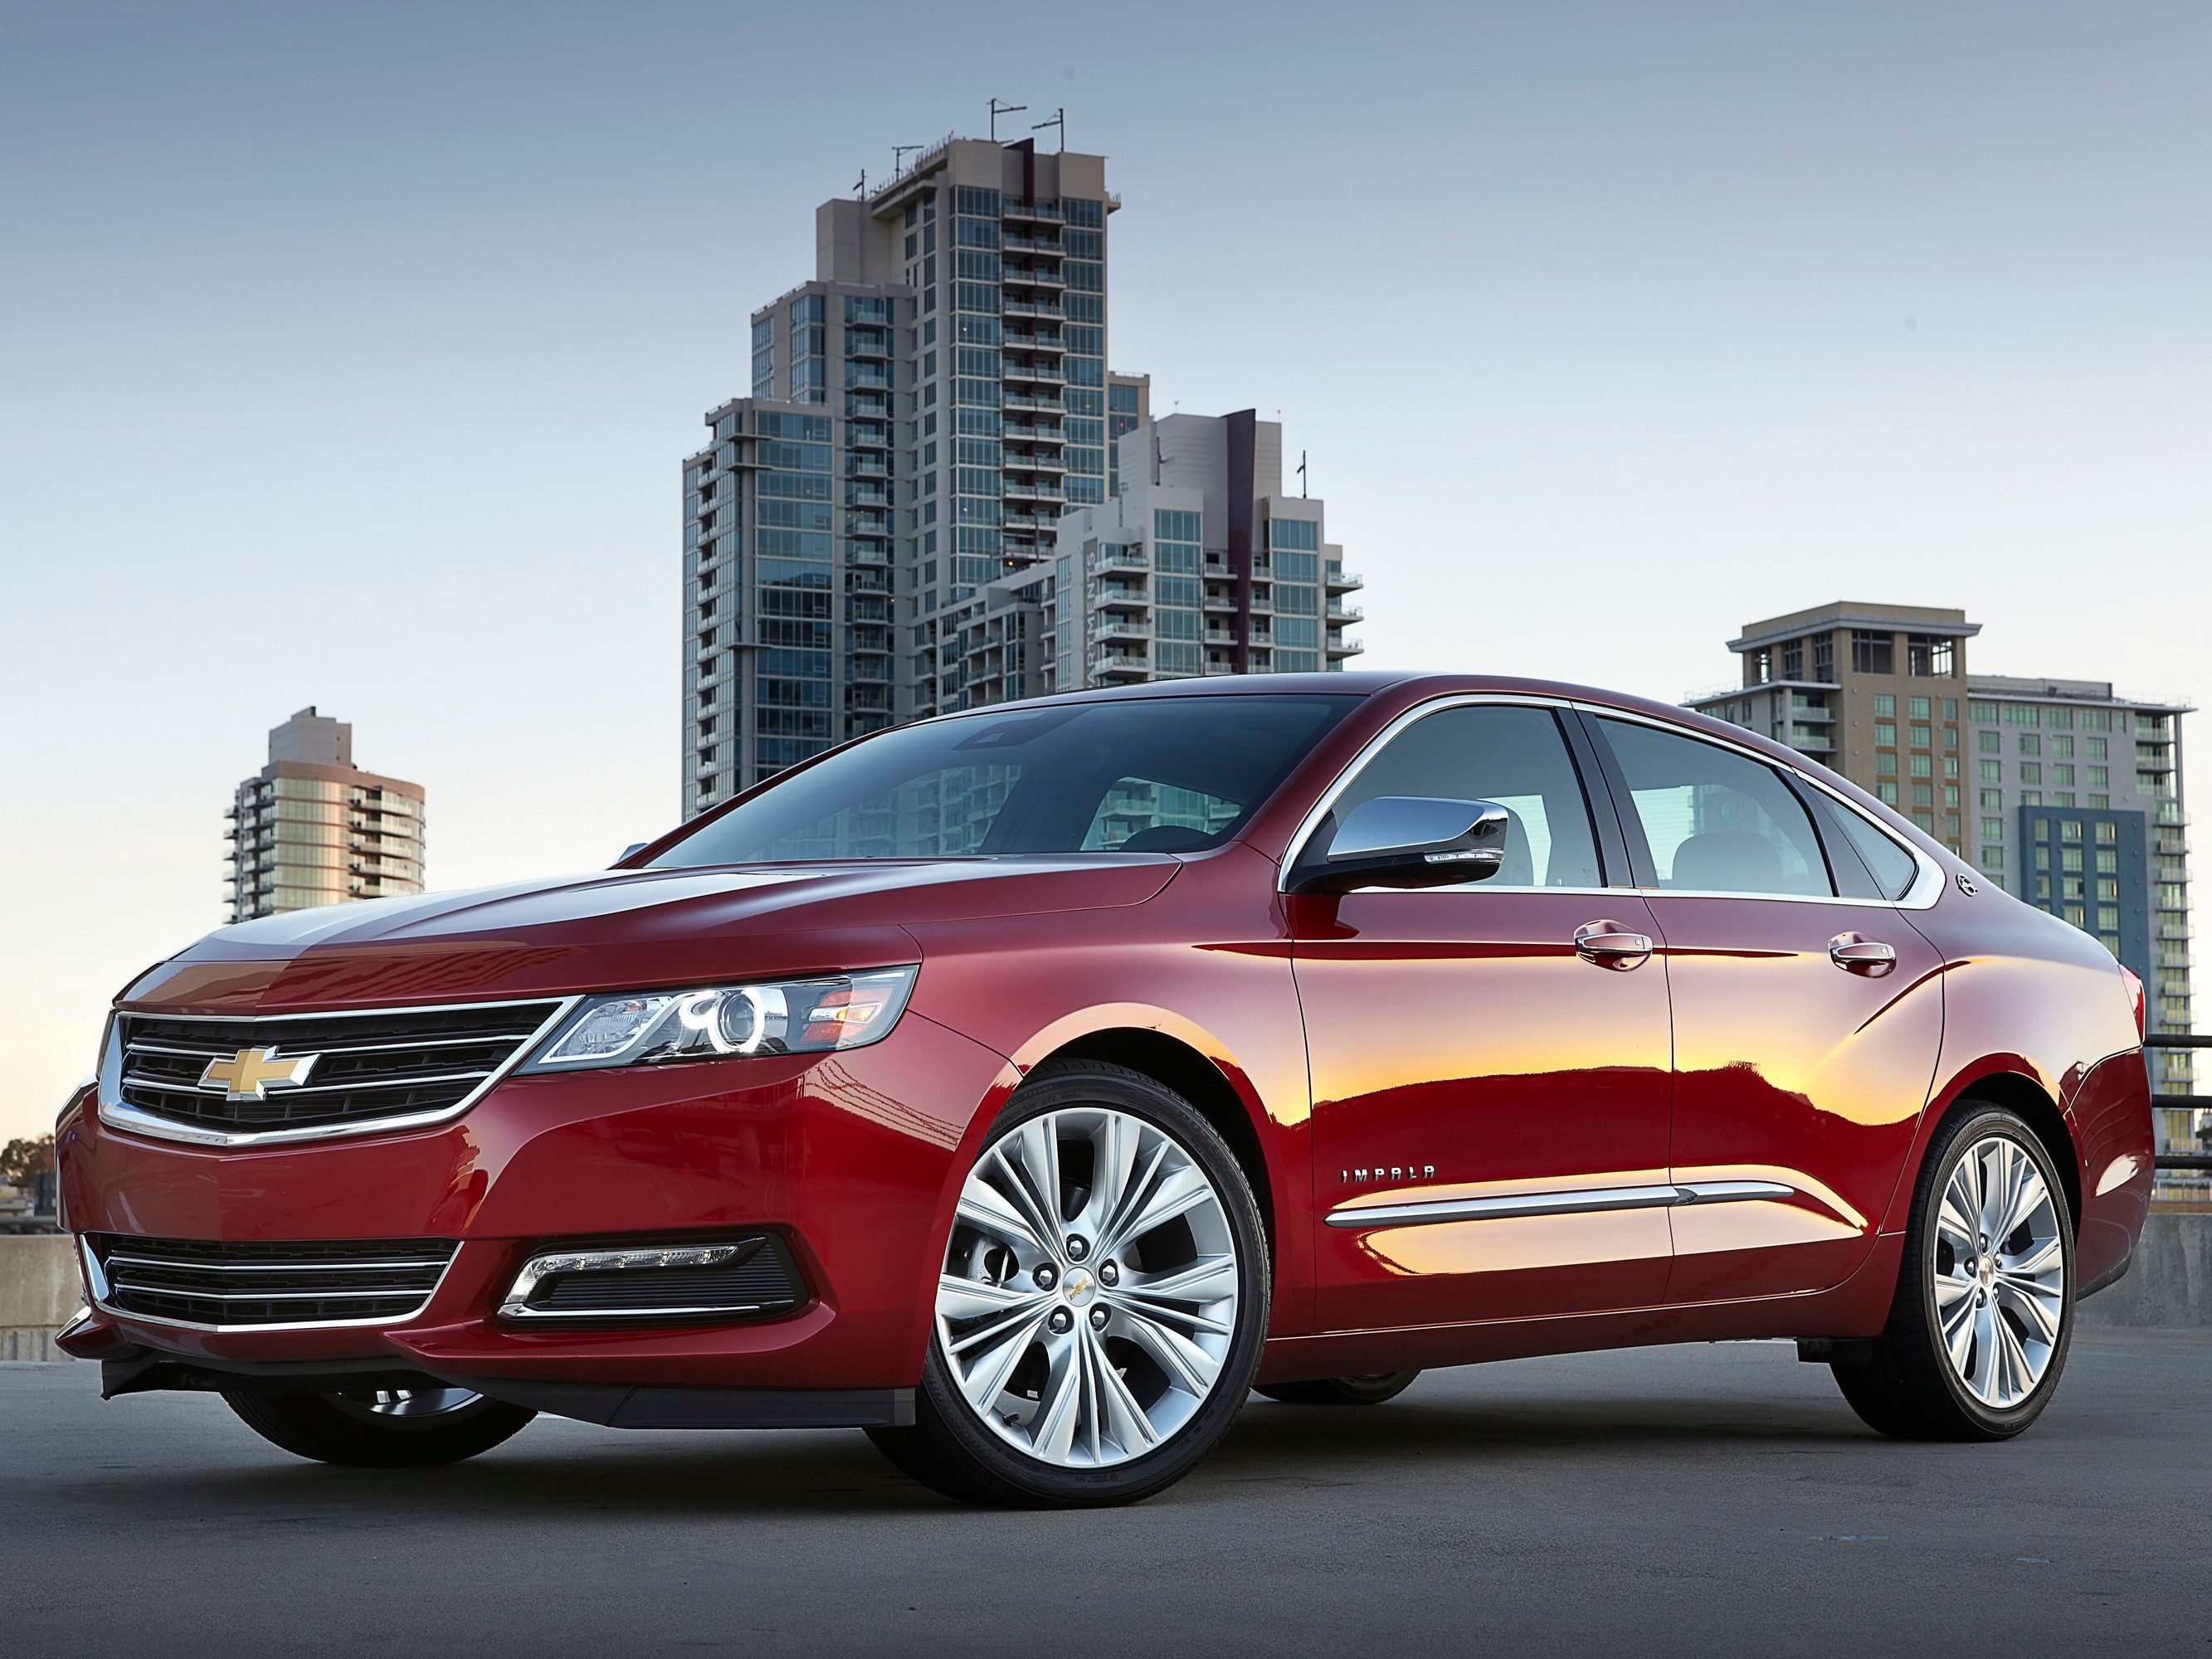 Introducing the 2016 Chevrolet Impala